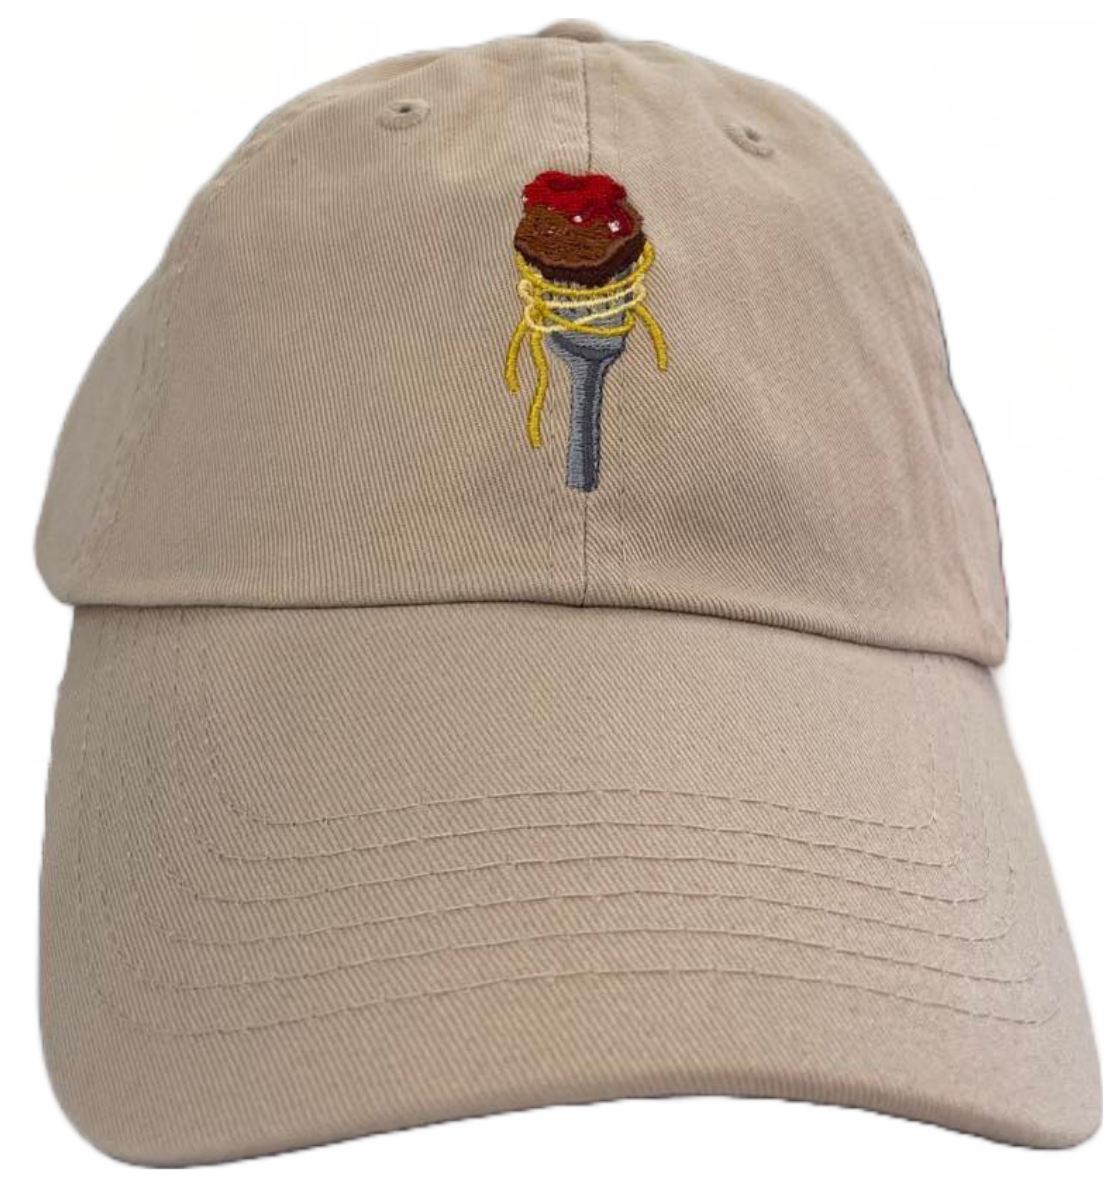 stone dad cap with spaghetti and meatball on a fork embroidery